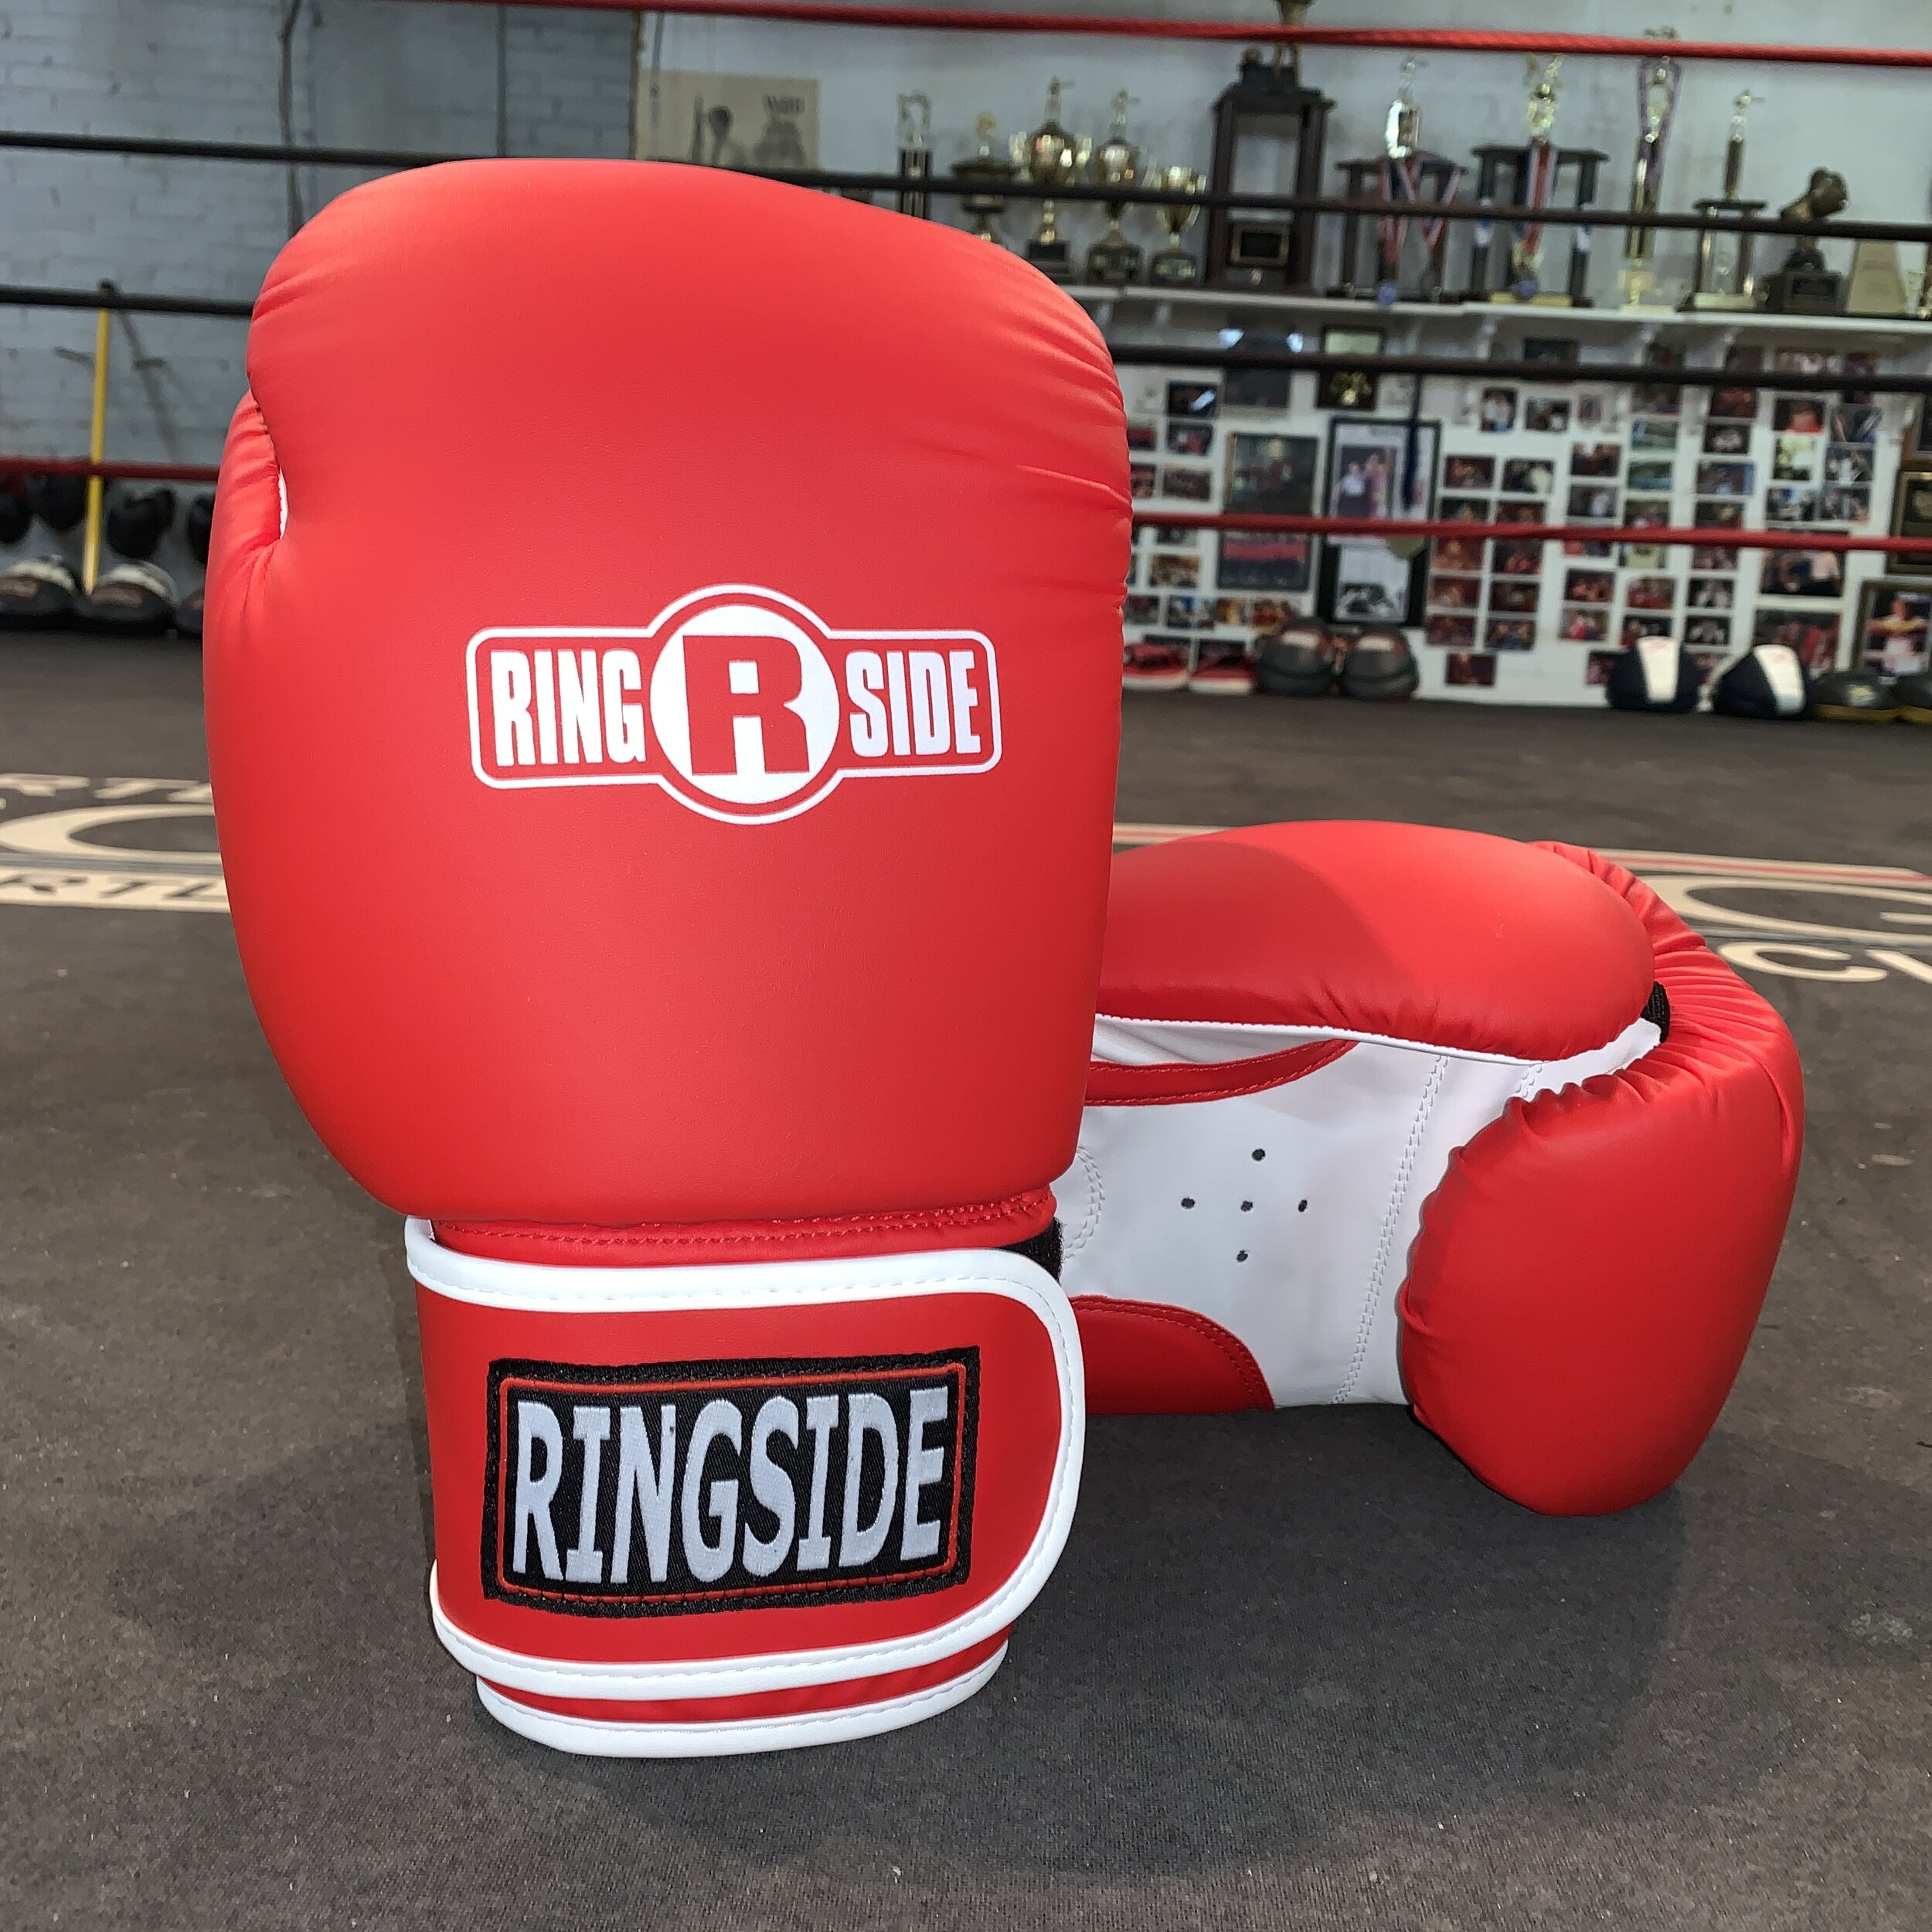 Ringside Boxing Punch Bags & Accessories from Made4Fighters